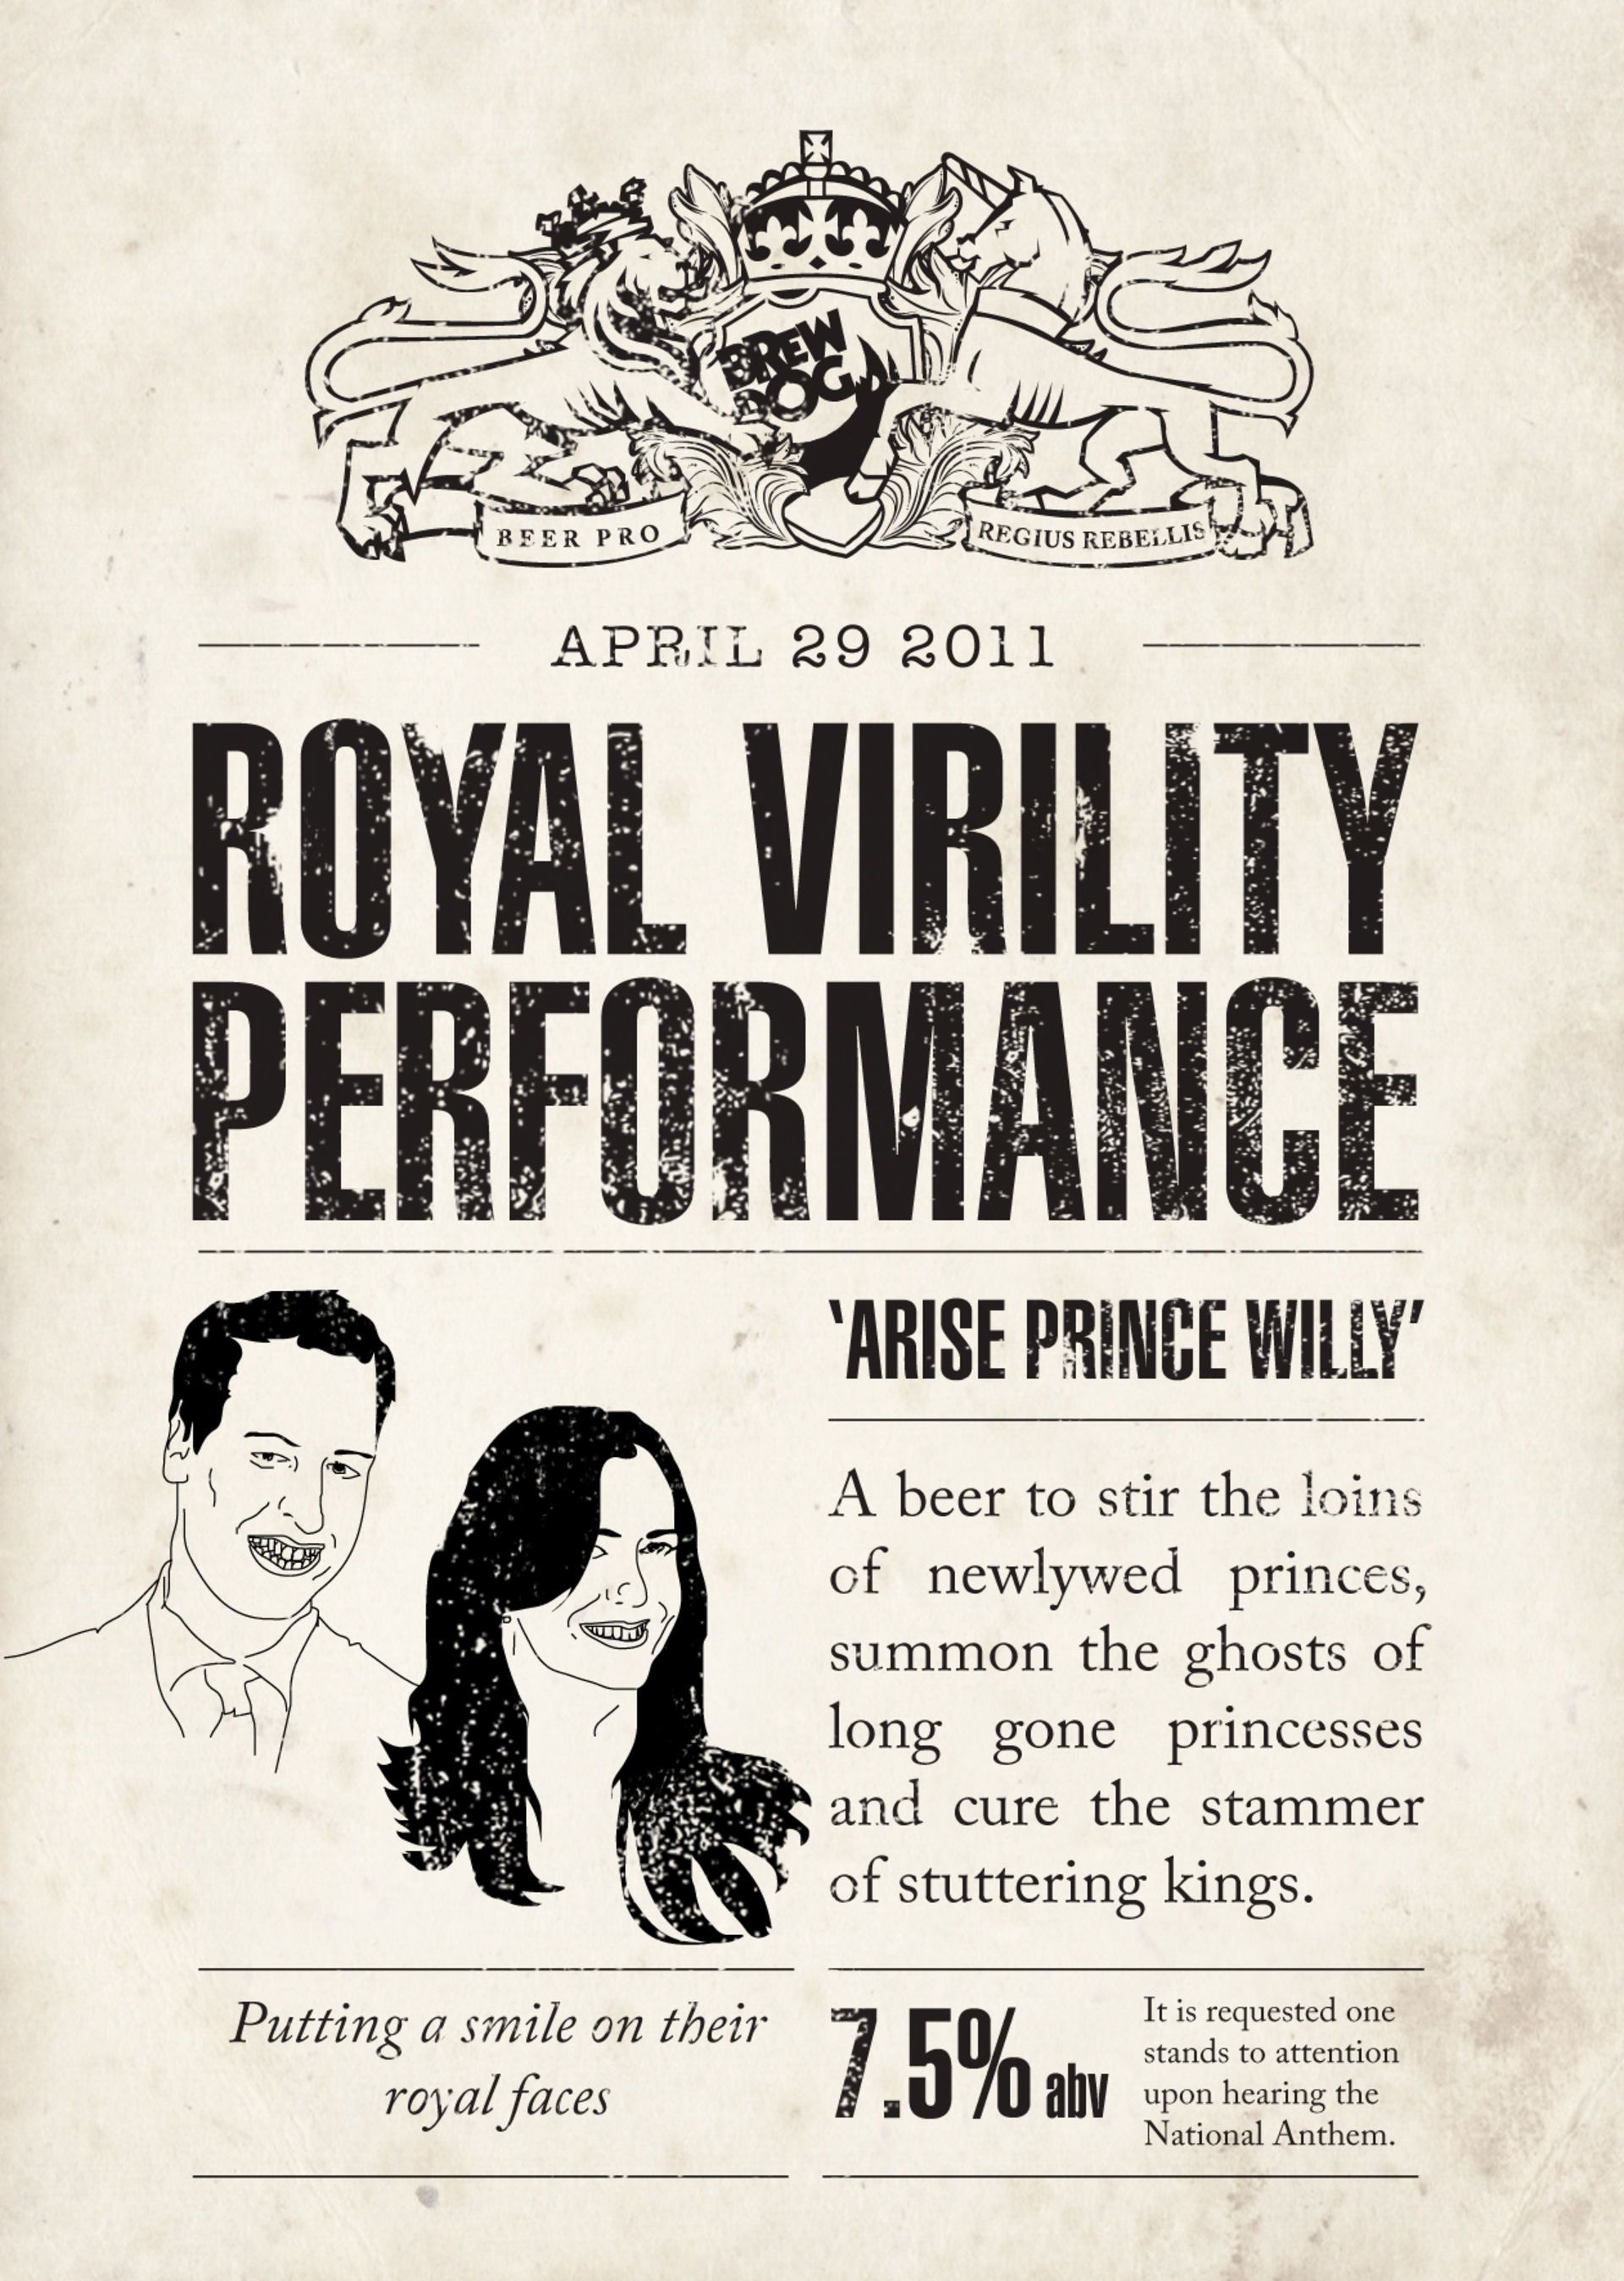 BrewDog's Royal Virility Performance invites drinkers to 'celebrate your extra day off Big Willy Style'